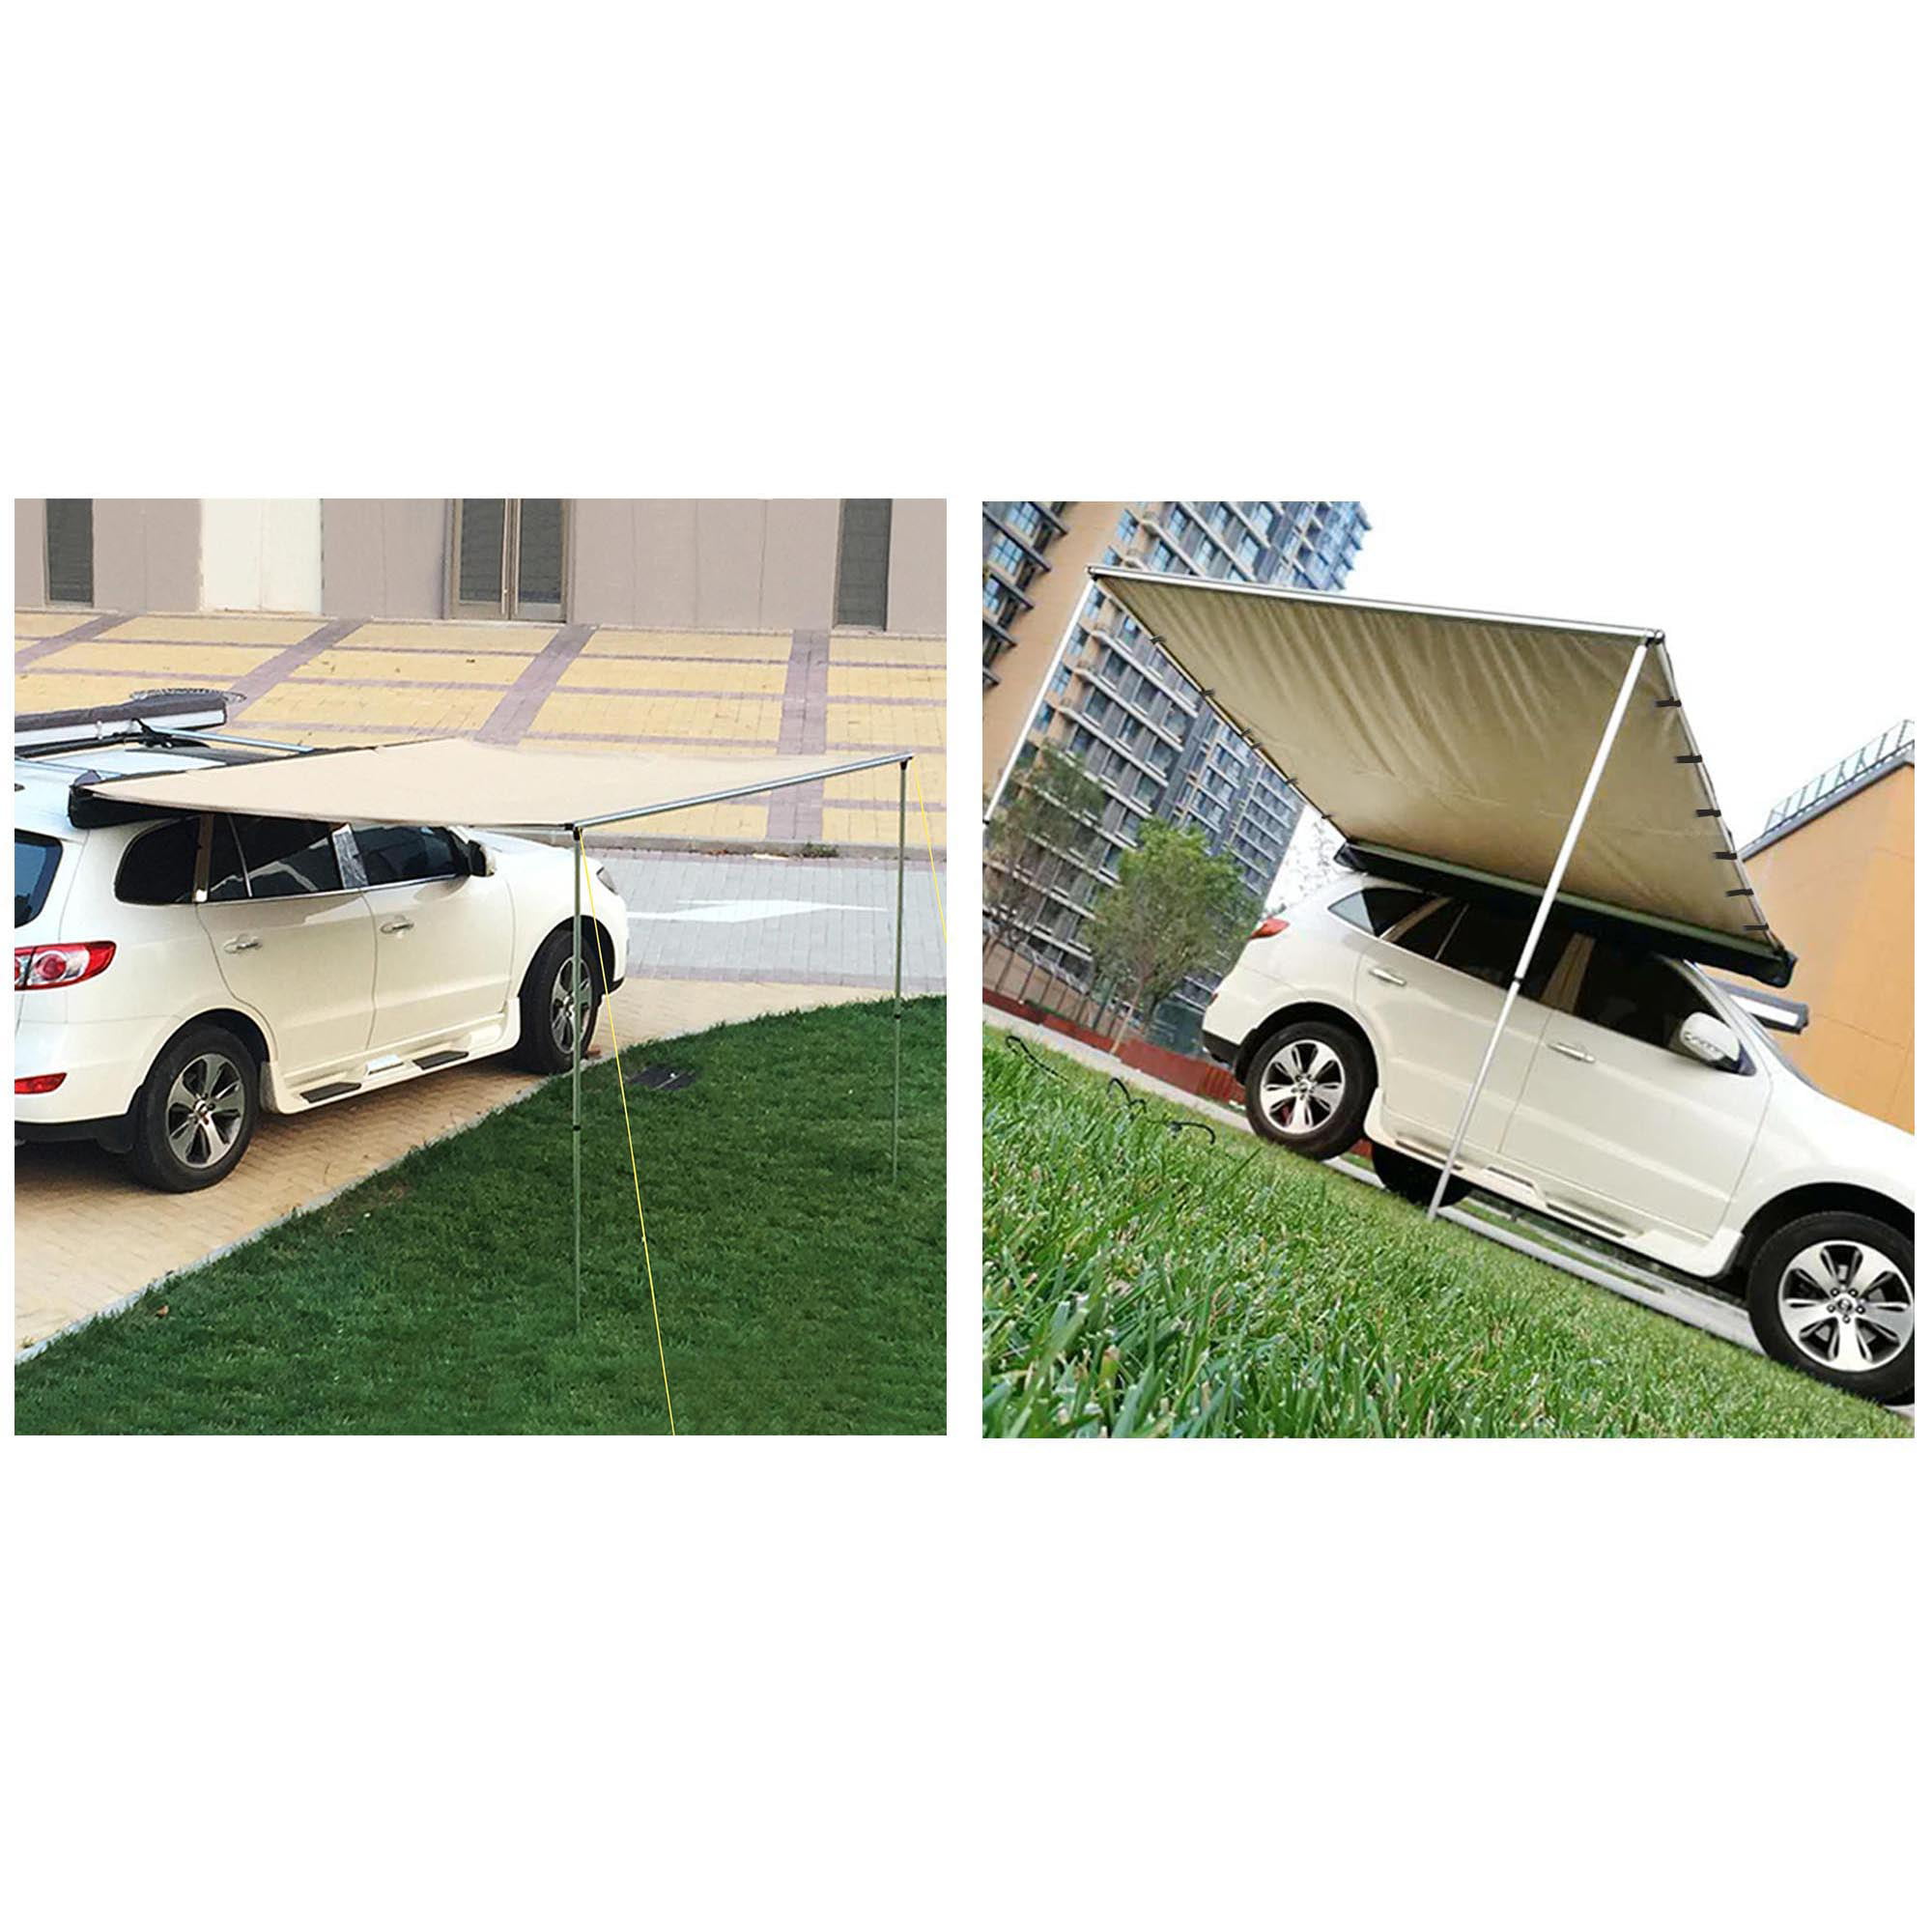 Yescom UV50+ Car Side Awning 4.6x6.6' Rooftop Pull Out Tent